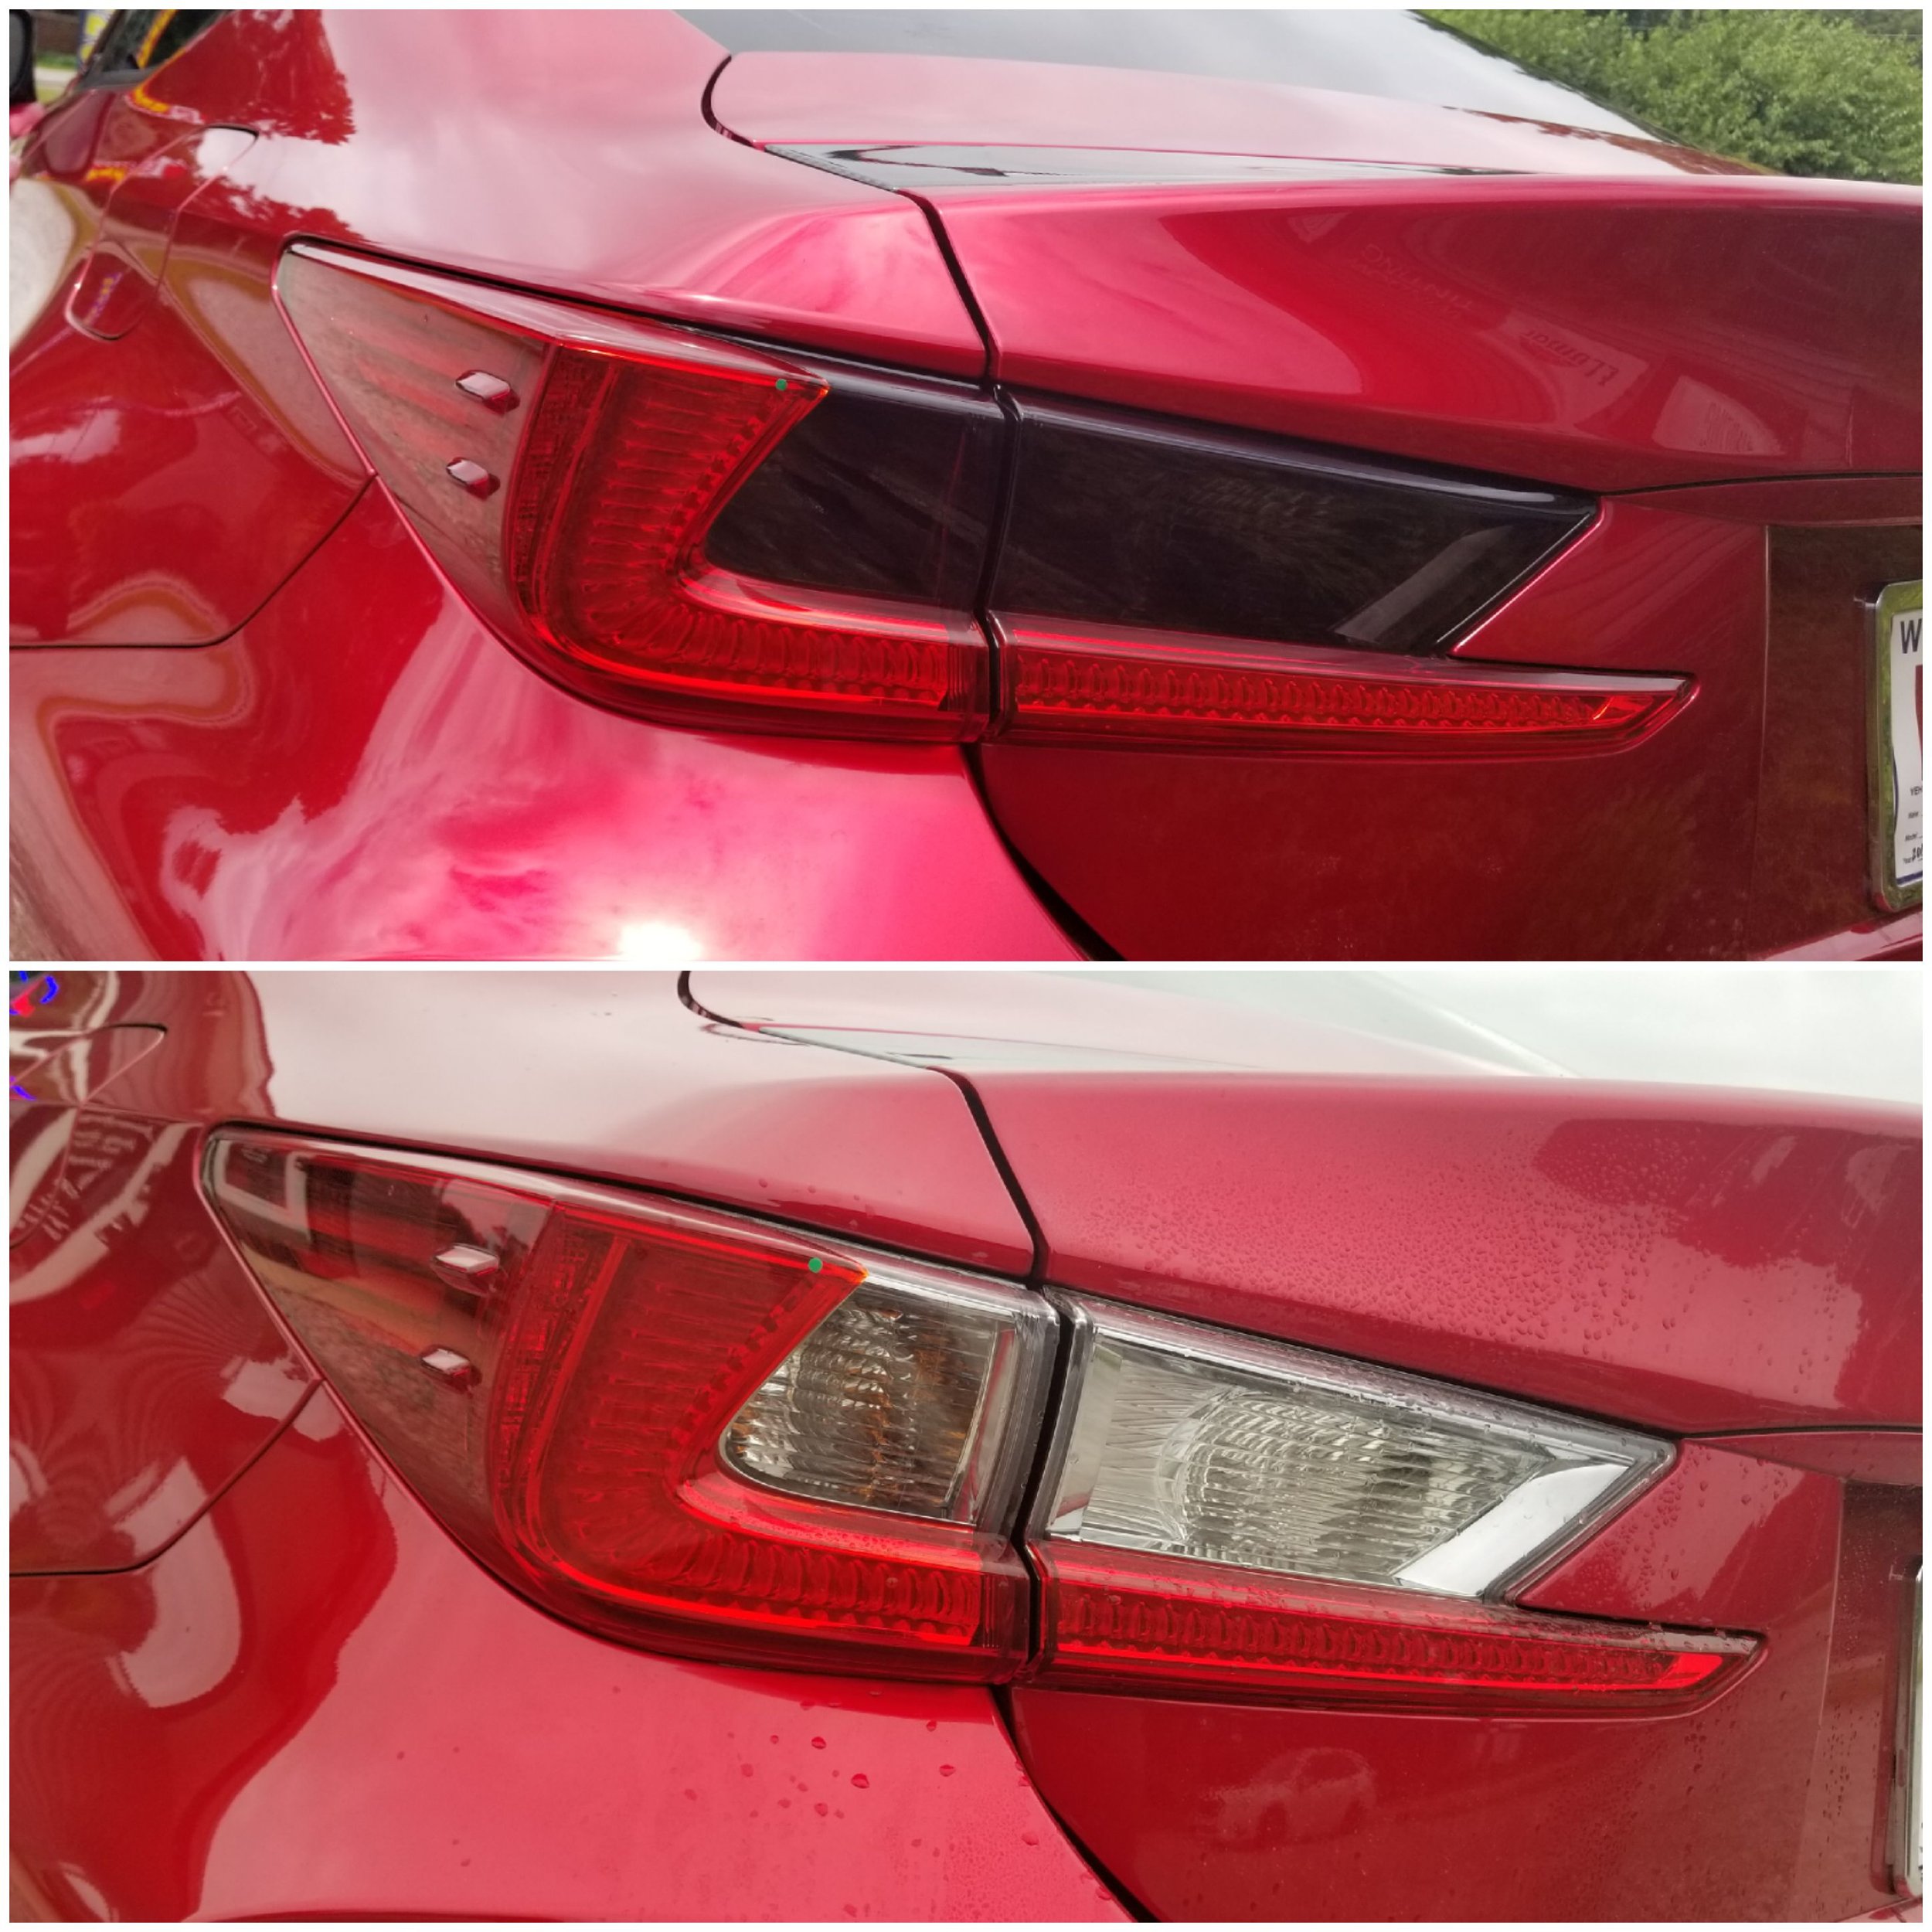 How Much Does Headlight Tint Cost?